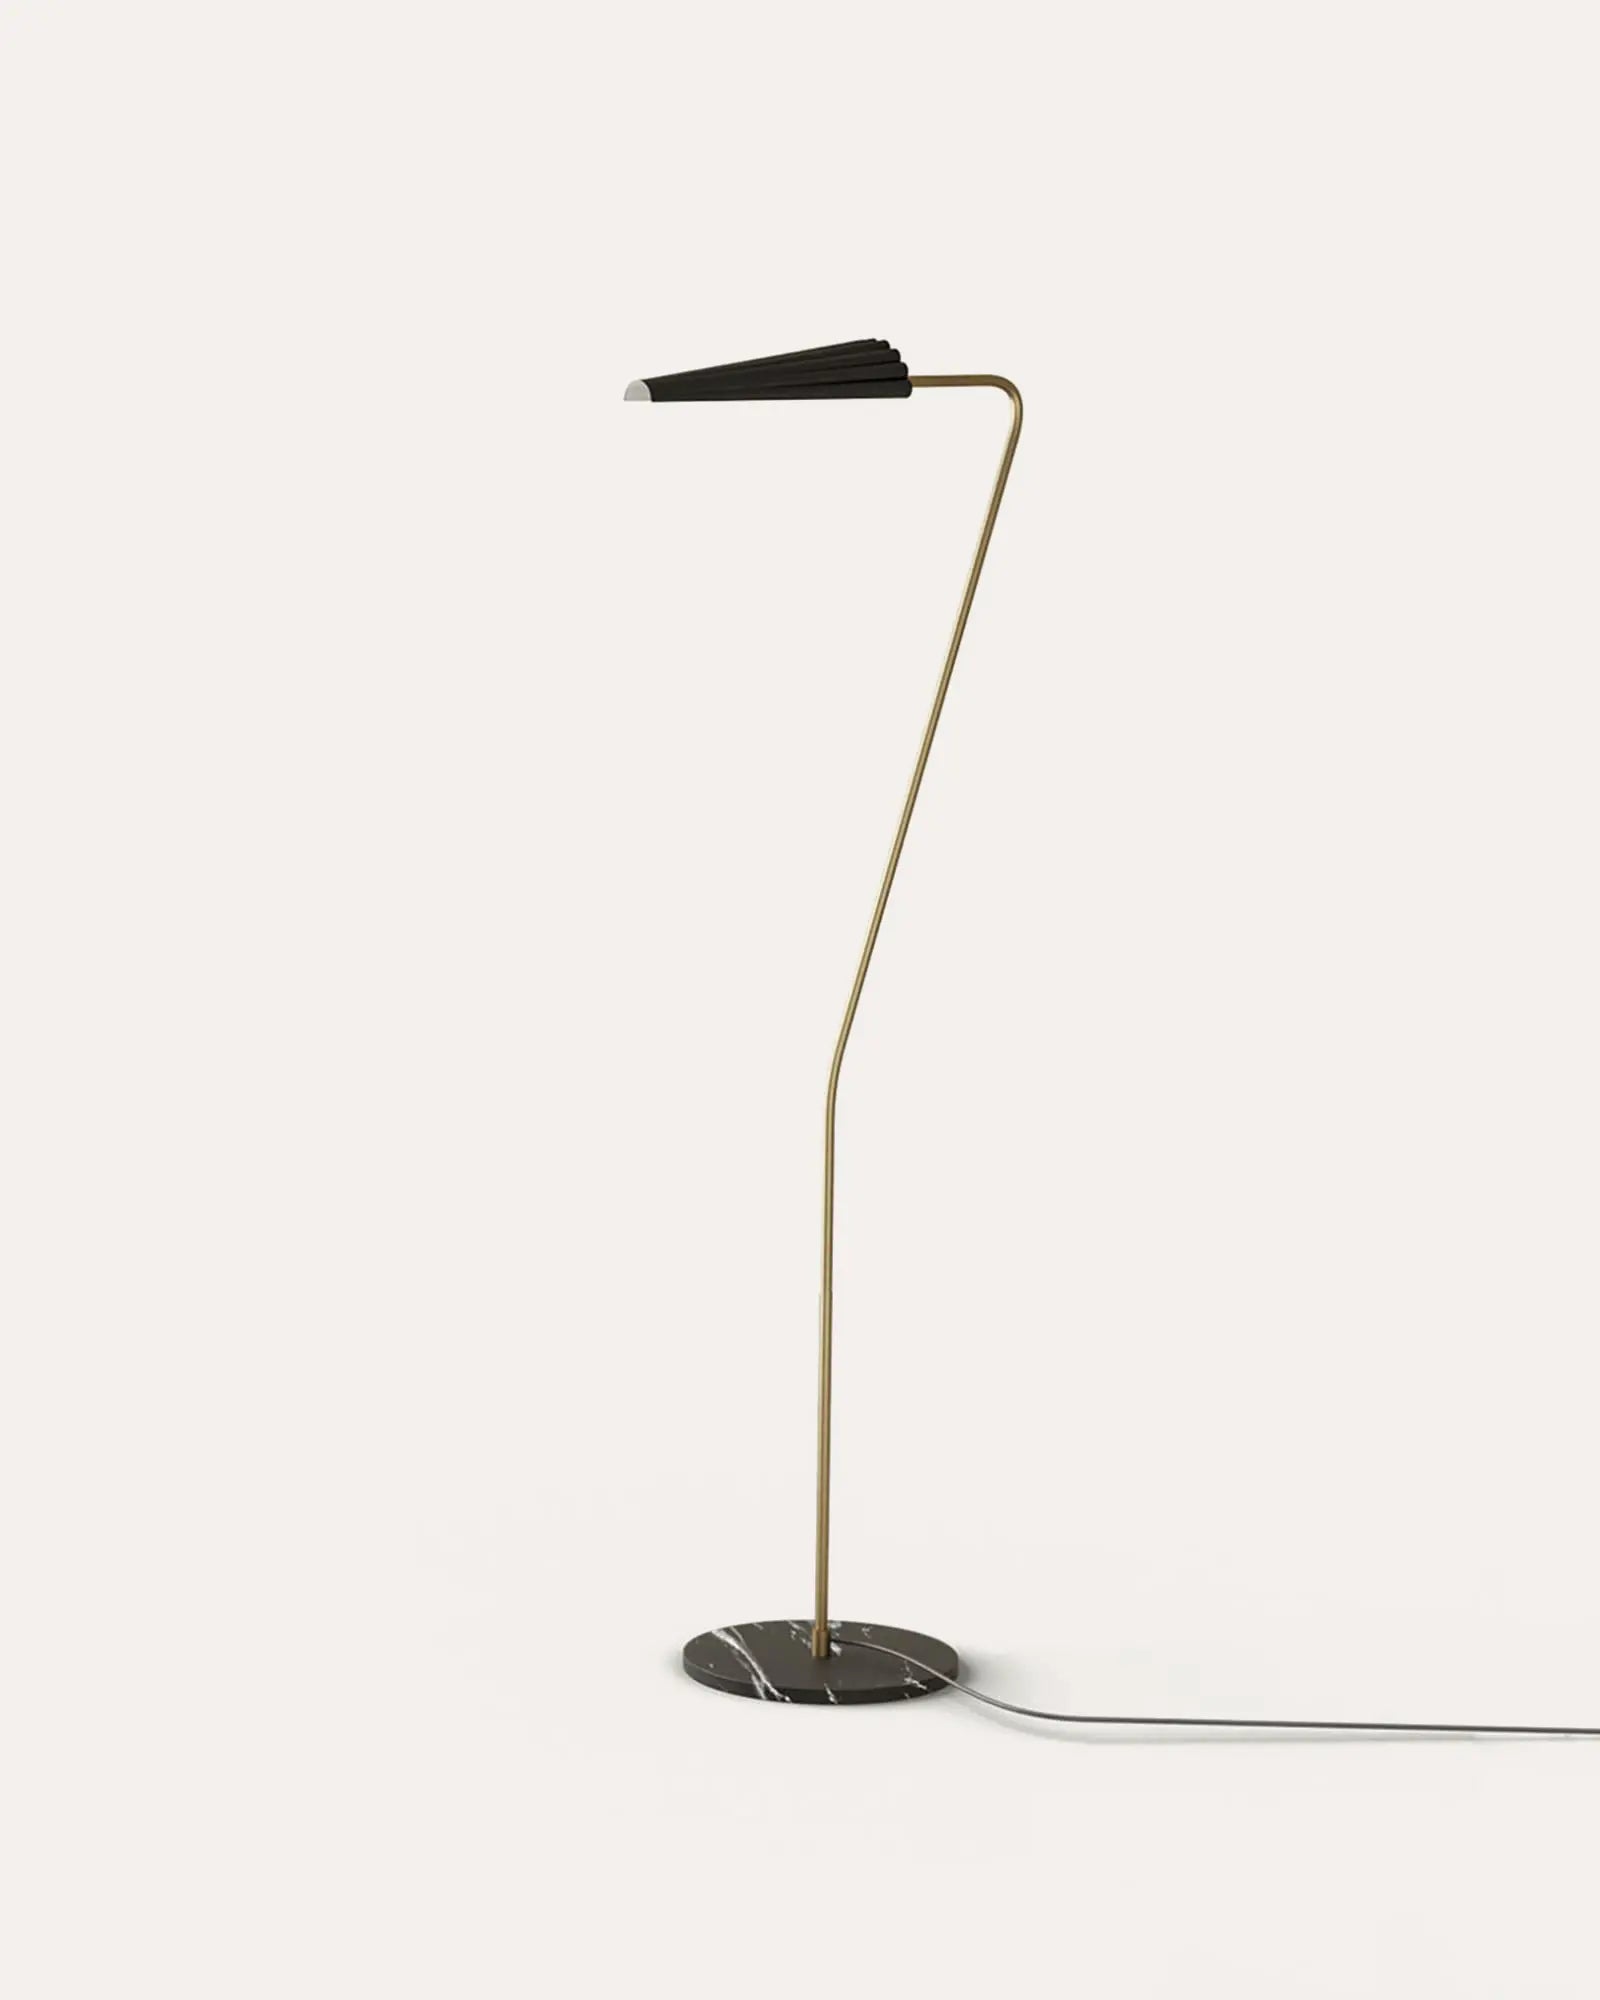 Bion contemporary floor lamp with corrugated steel shade brass stem